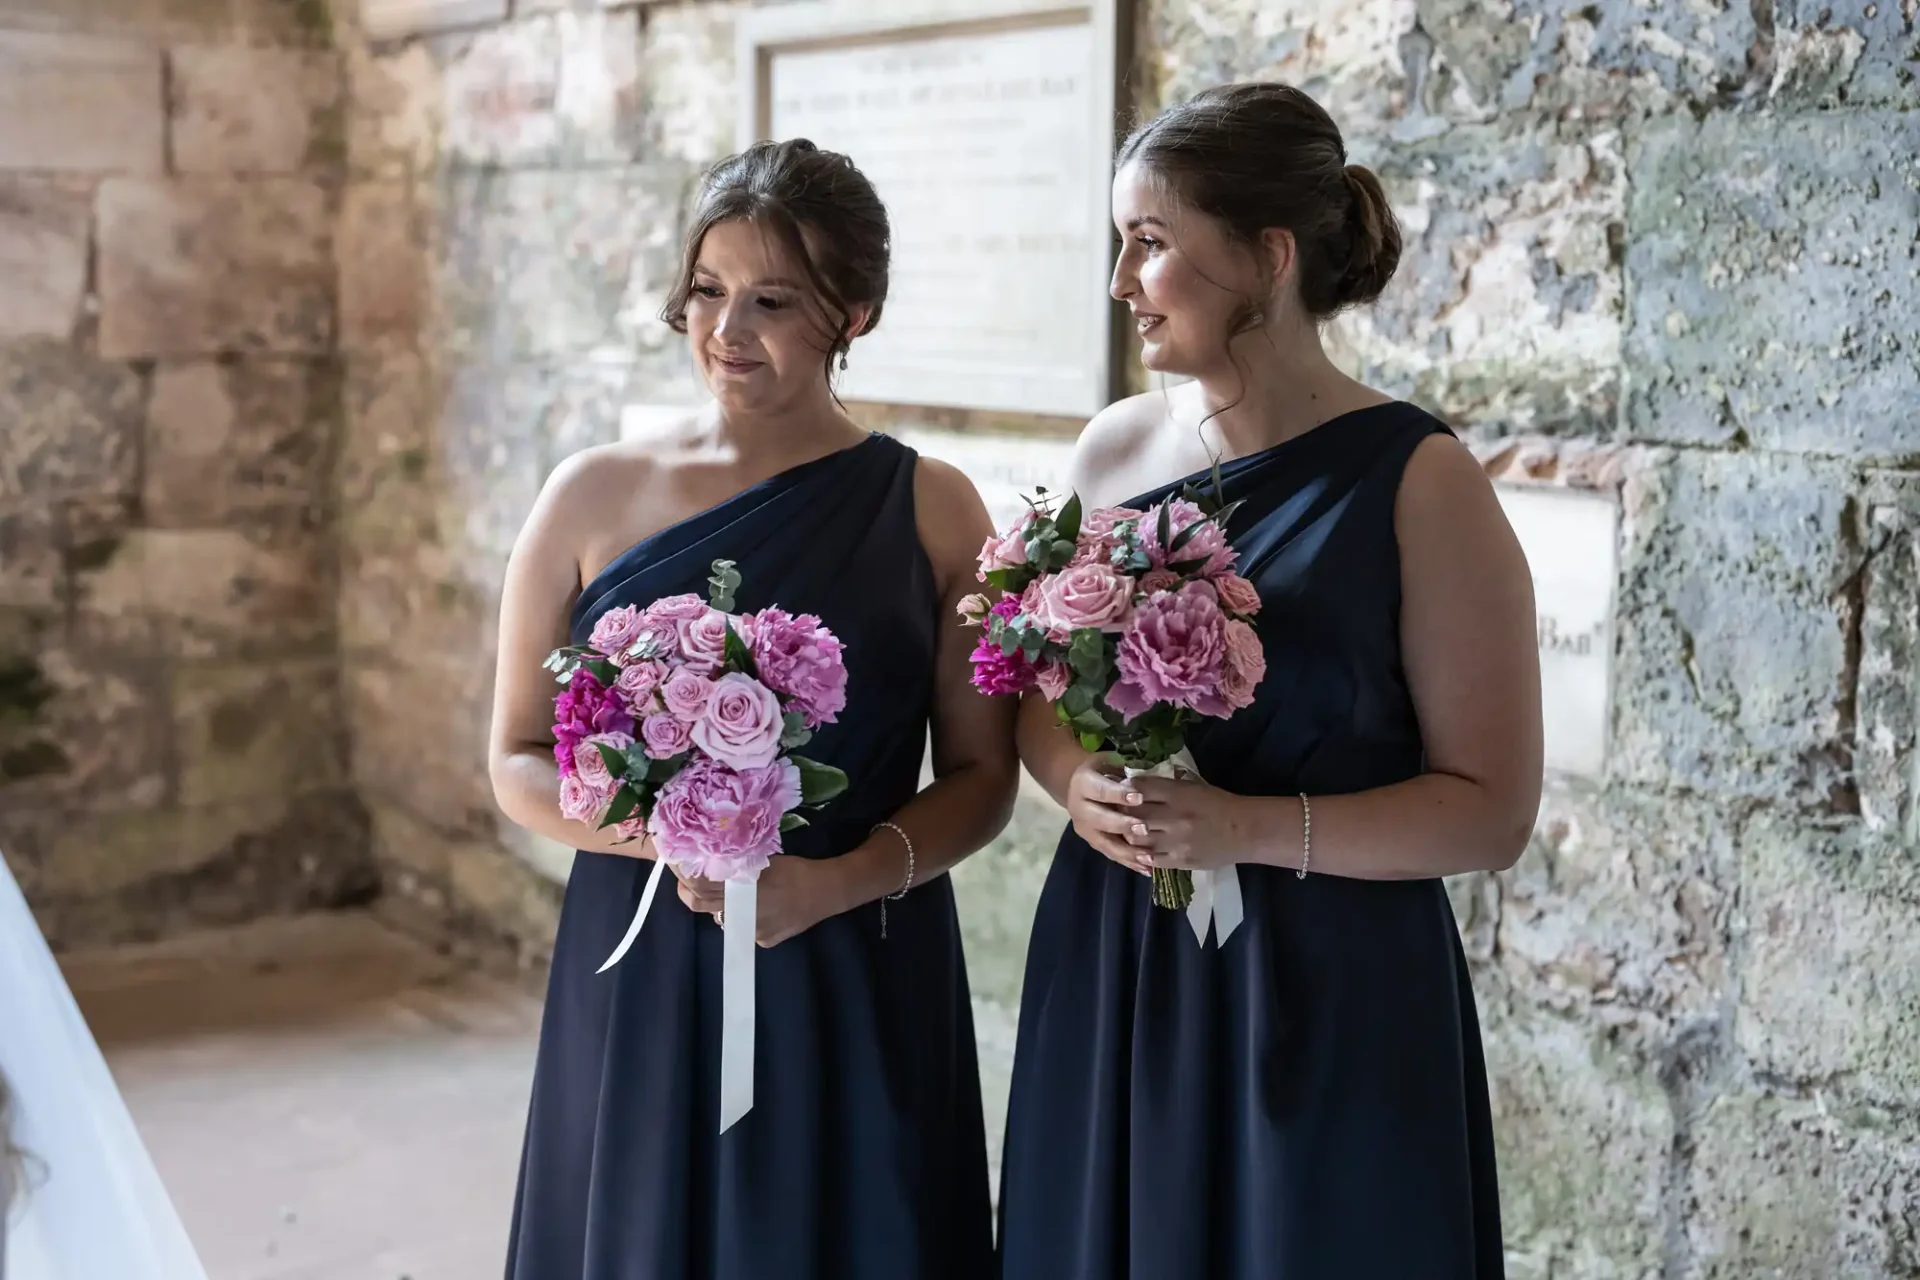 Two bridesmaids in navy dresses holding pink floral bouquets, standing by a rustic brick wall inside a venue.